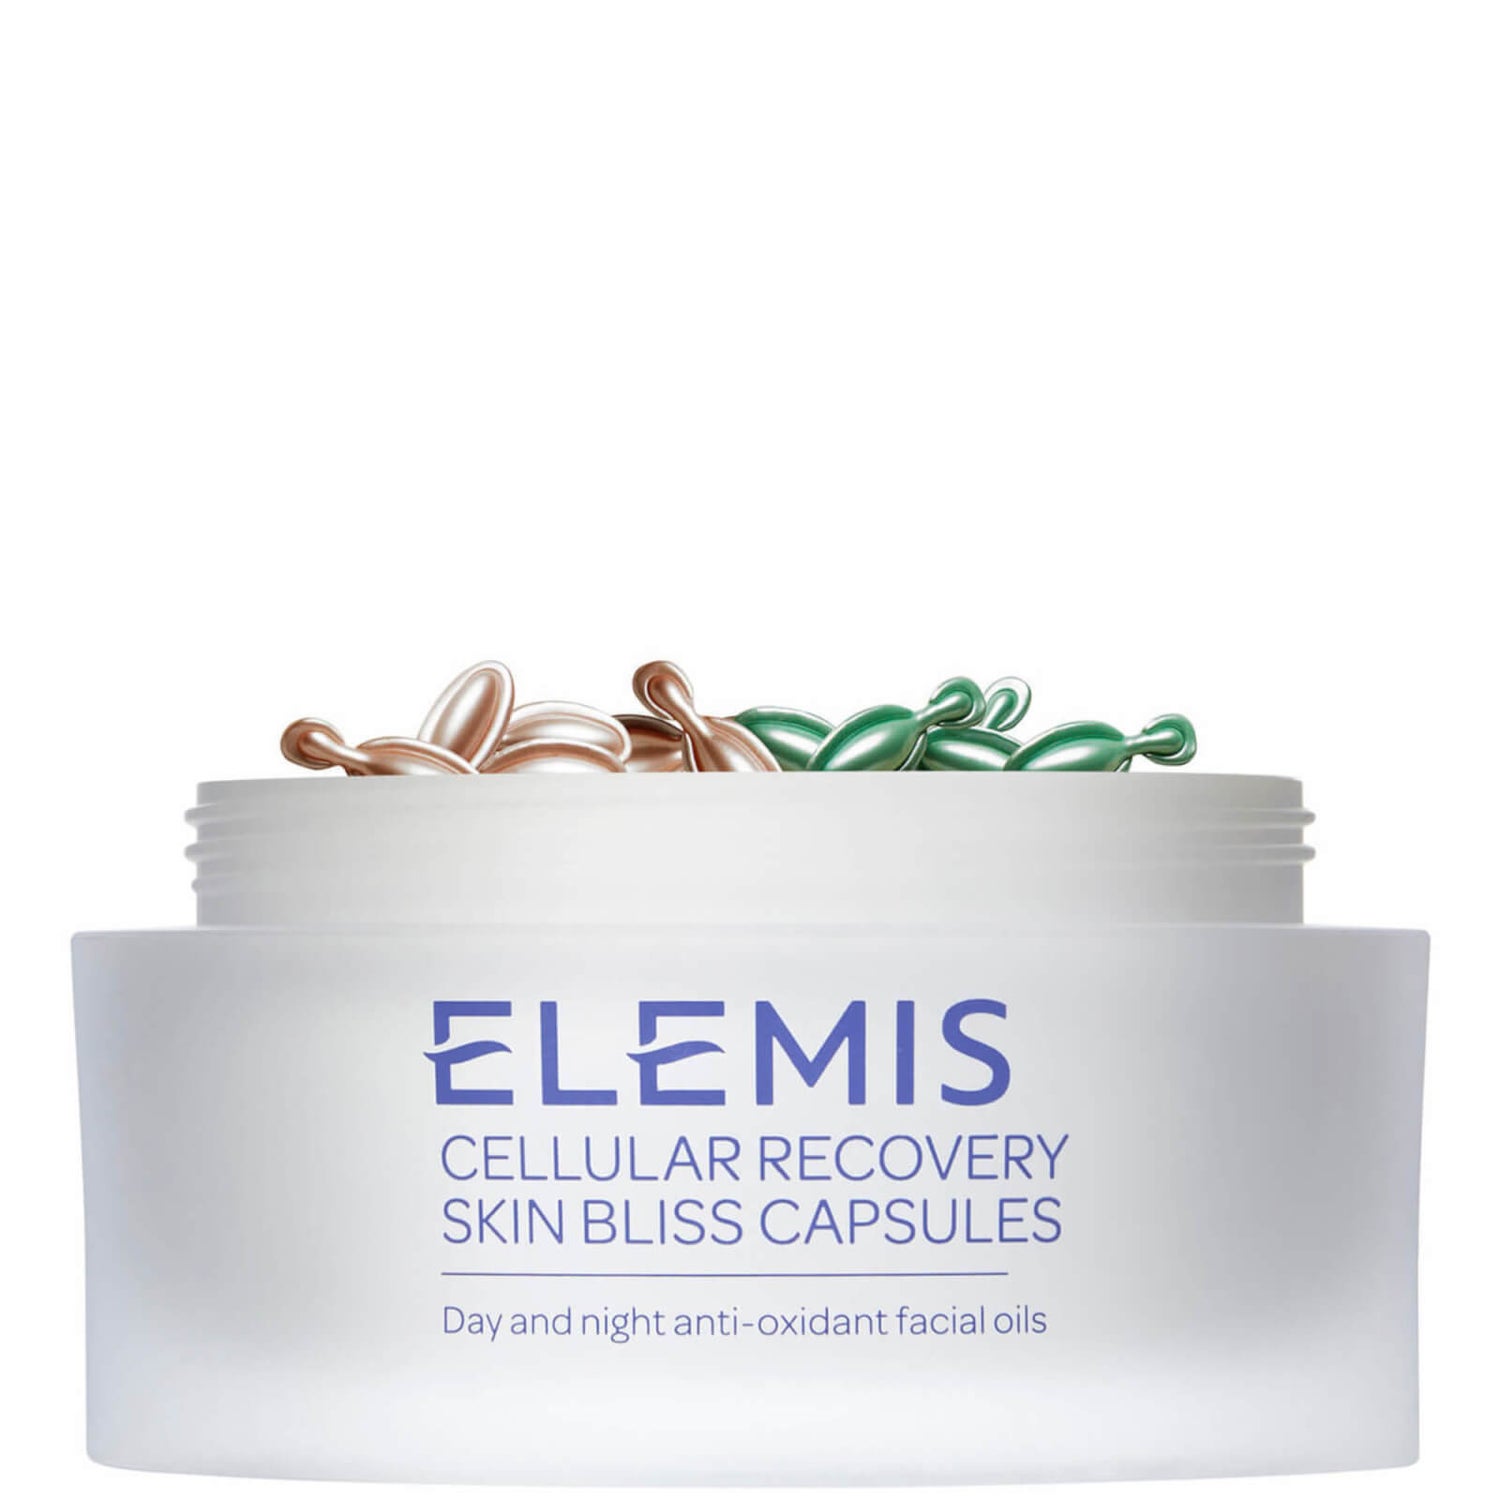 Cellular Recovery Skin Bliss Capsules - 30 Capsules